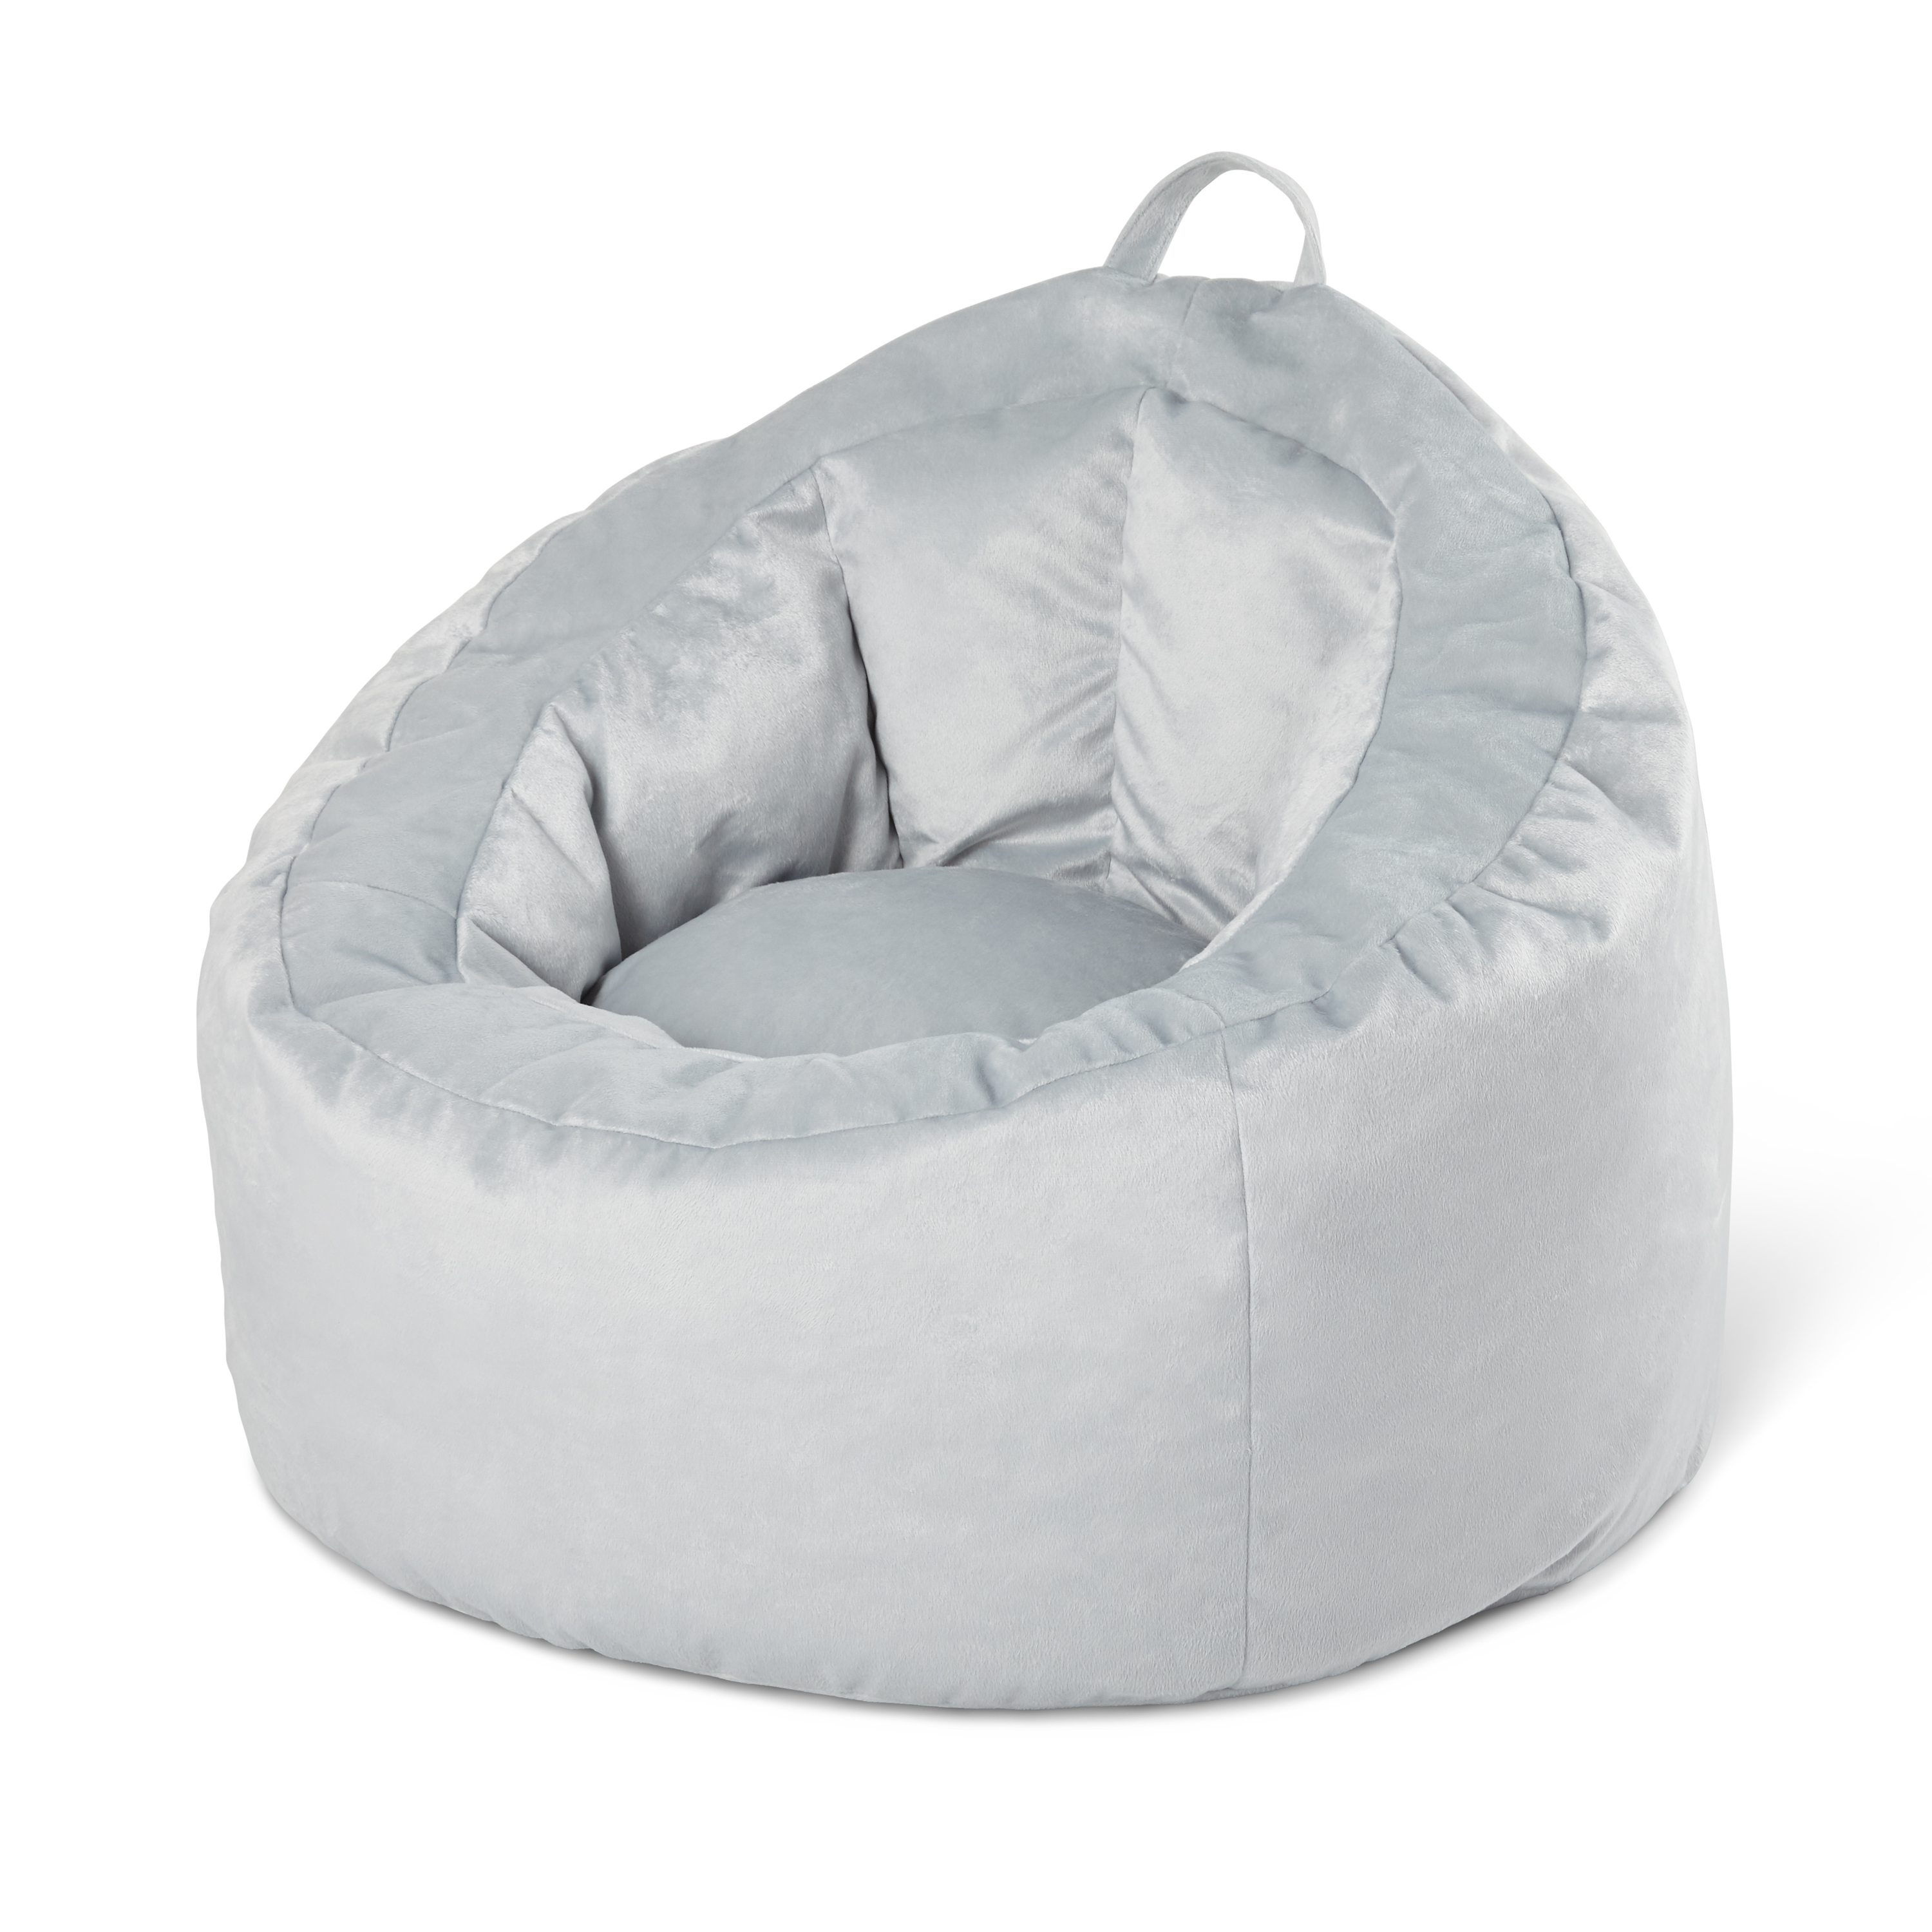 Buy Your Zone Bean Bag Lounge Chair With Pocket